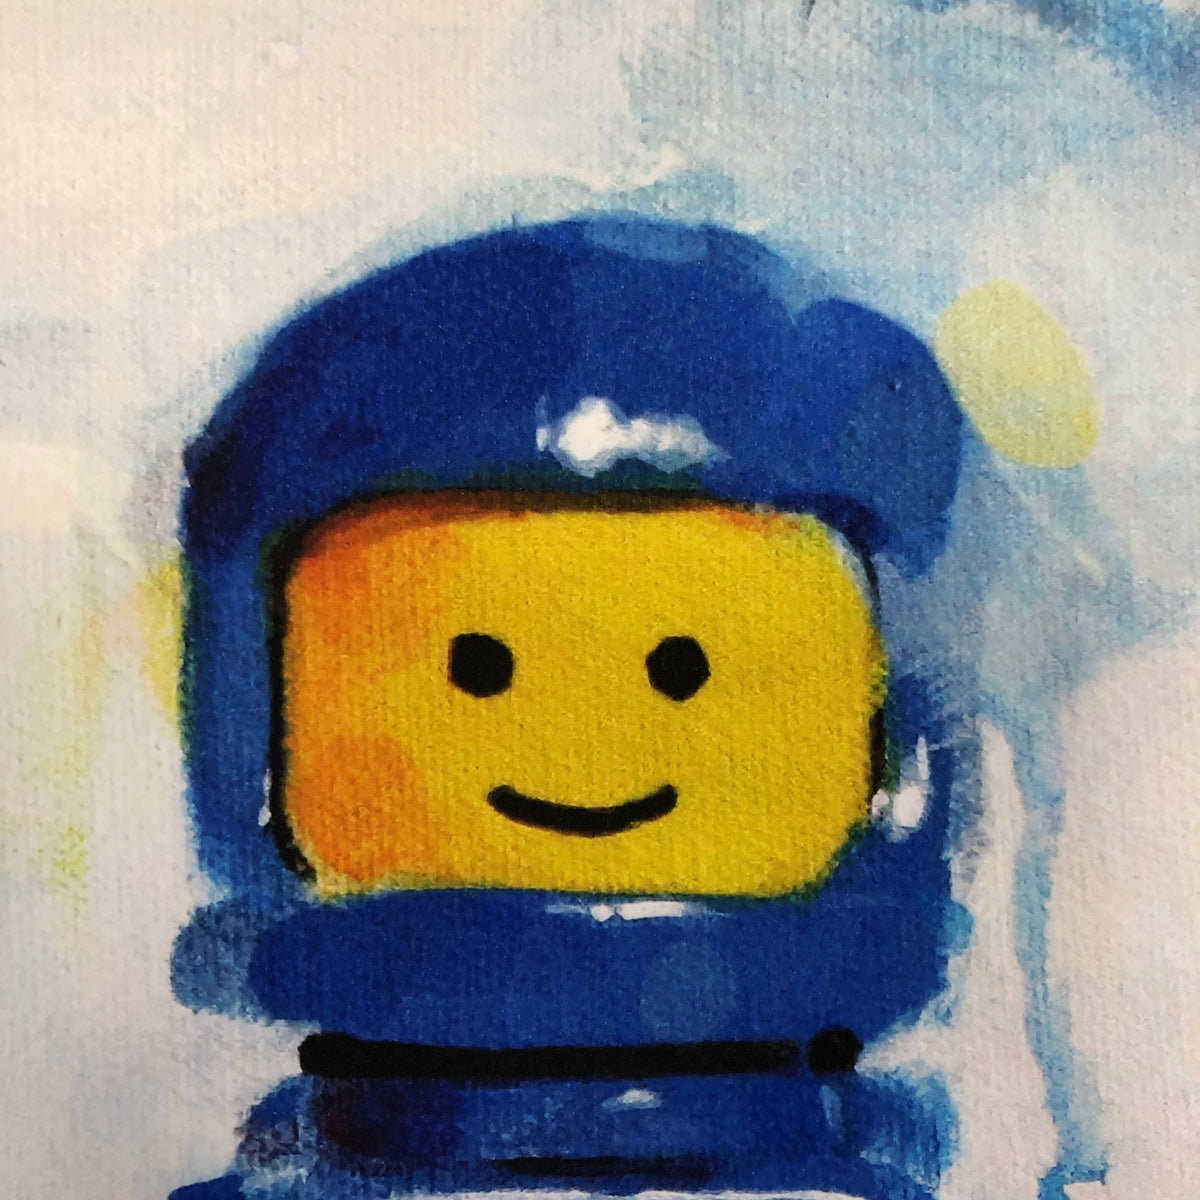 Lego-Blue by James Paterson